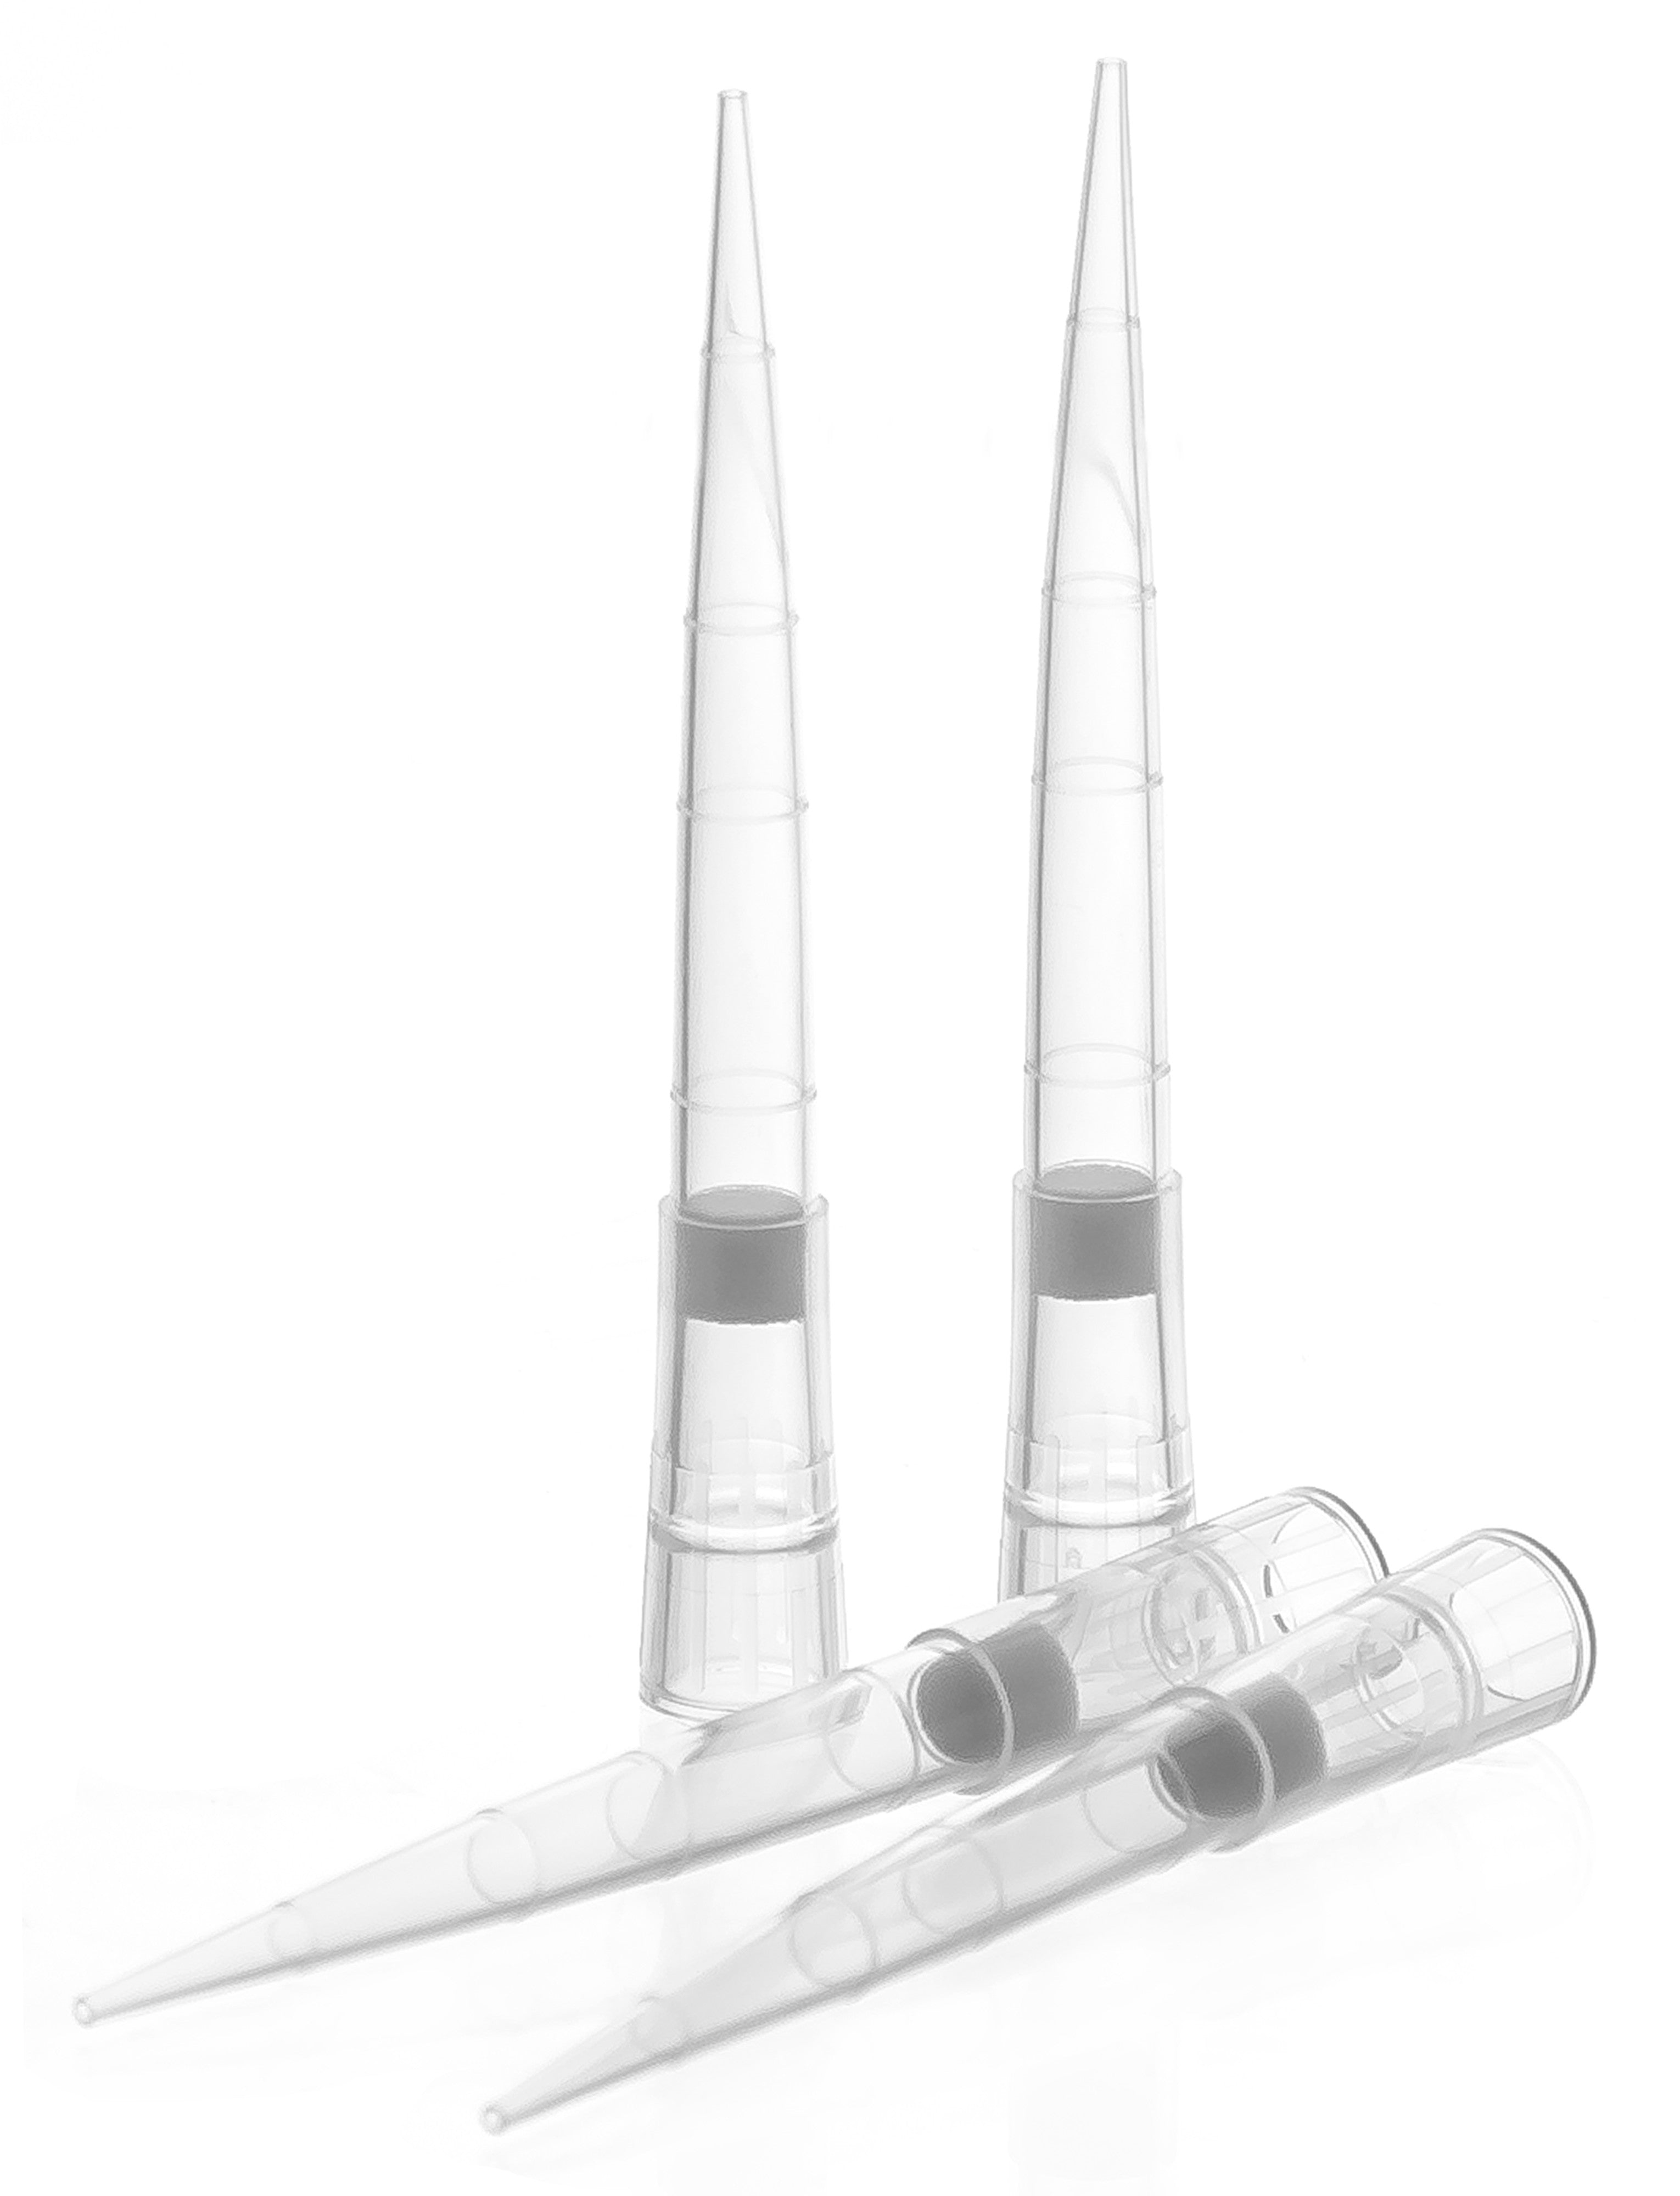 Filtered Micropipette Tips, 1000µl, Autoclavable, Pack of 500